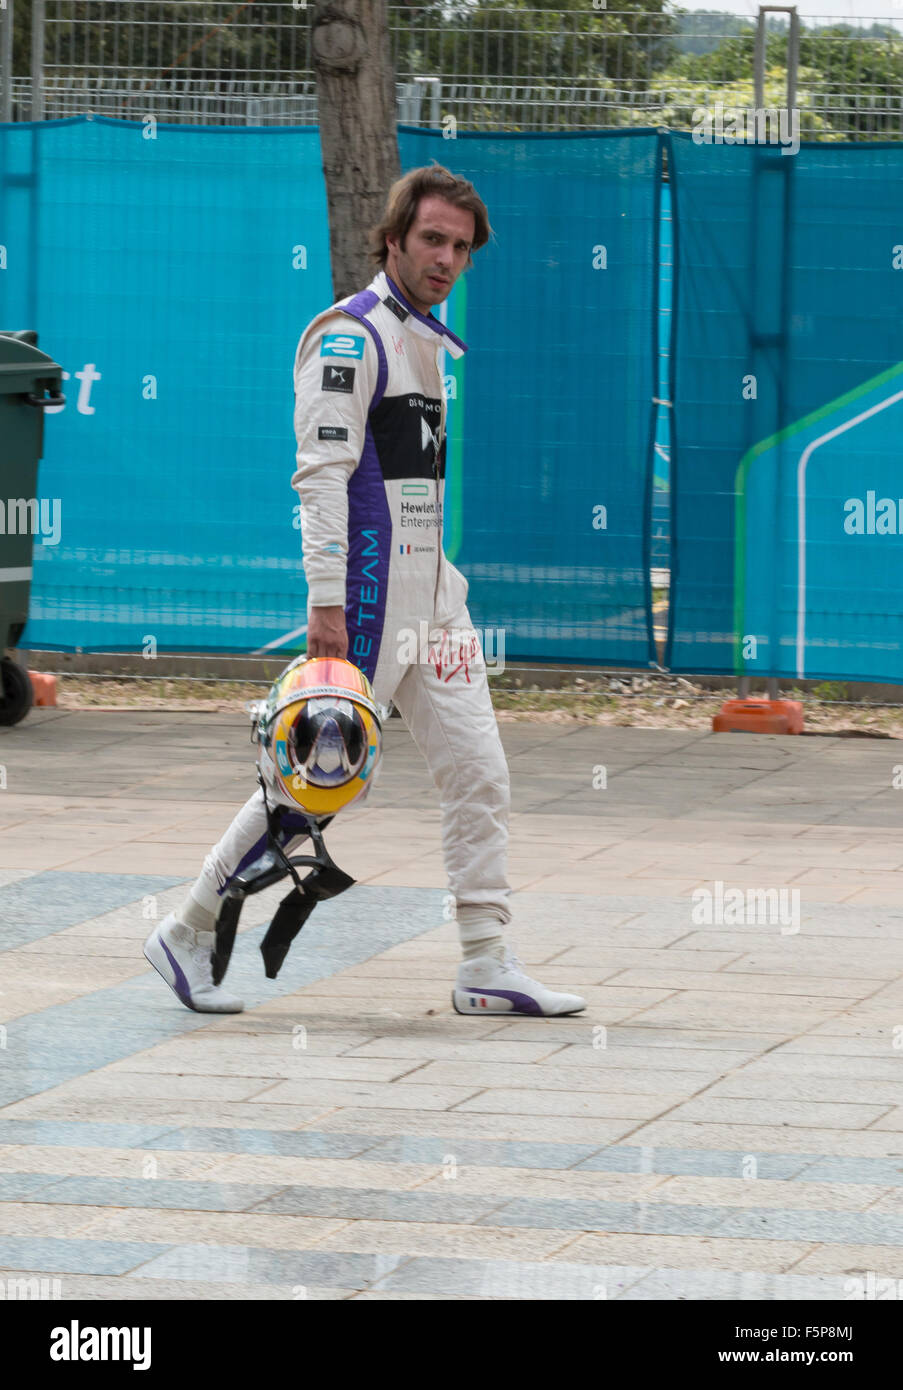 Nick Heidfeld walks back to the pits after a first-lap collision forced his retirement from the 2015 Formula E ePrix in Malaysia Stock Photo